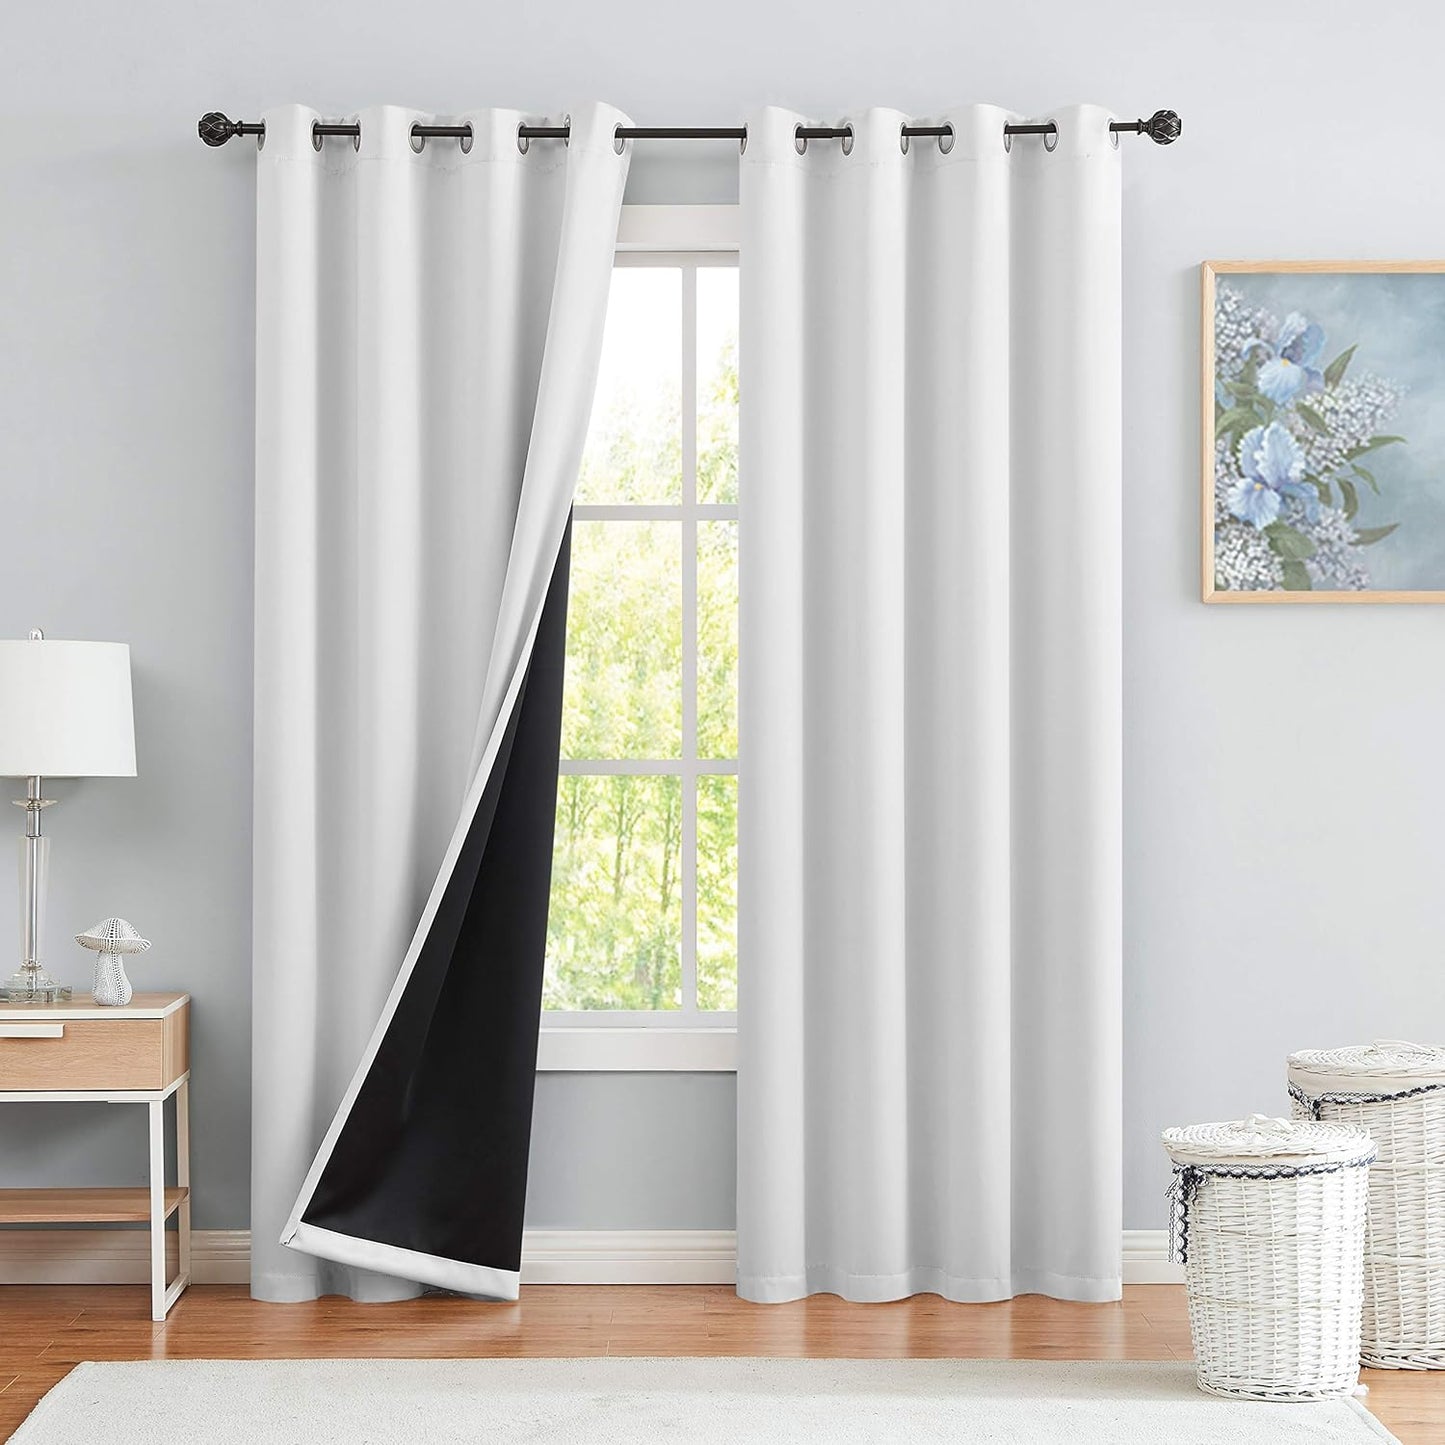 Black Blackout Curtains for Bedroom Living-Room Holiday Season Metallic Polka Dots Pattern Curtains for Nursery 52 X 95 Inch Grommet Triple Weave Thermal Insulated Draperies for Kids Bedroom, 2Pcs  Urban Lotus White 52"X84" 